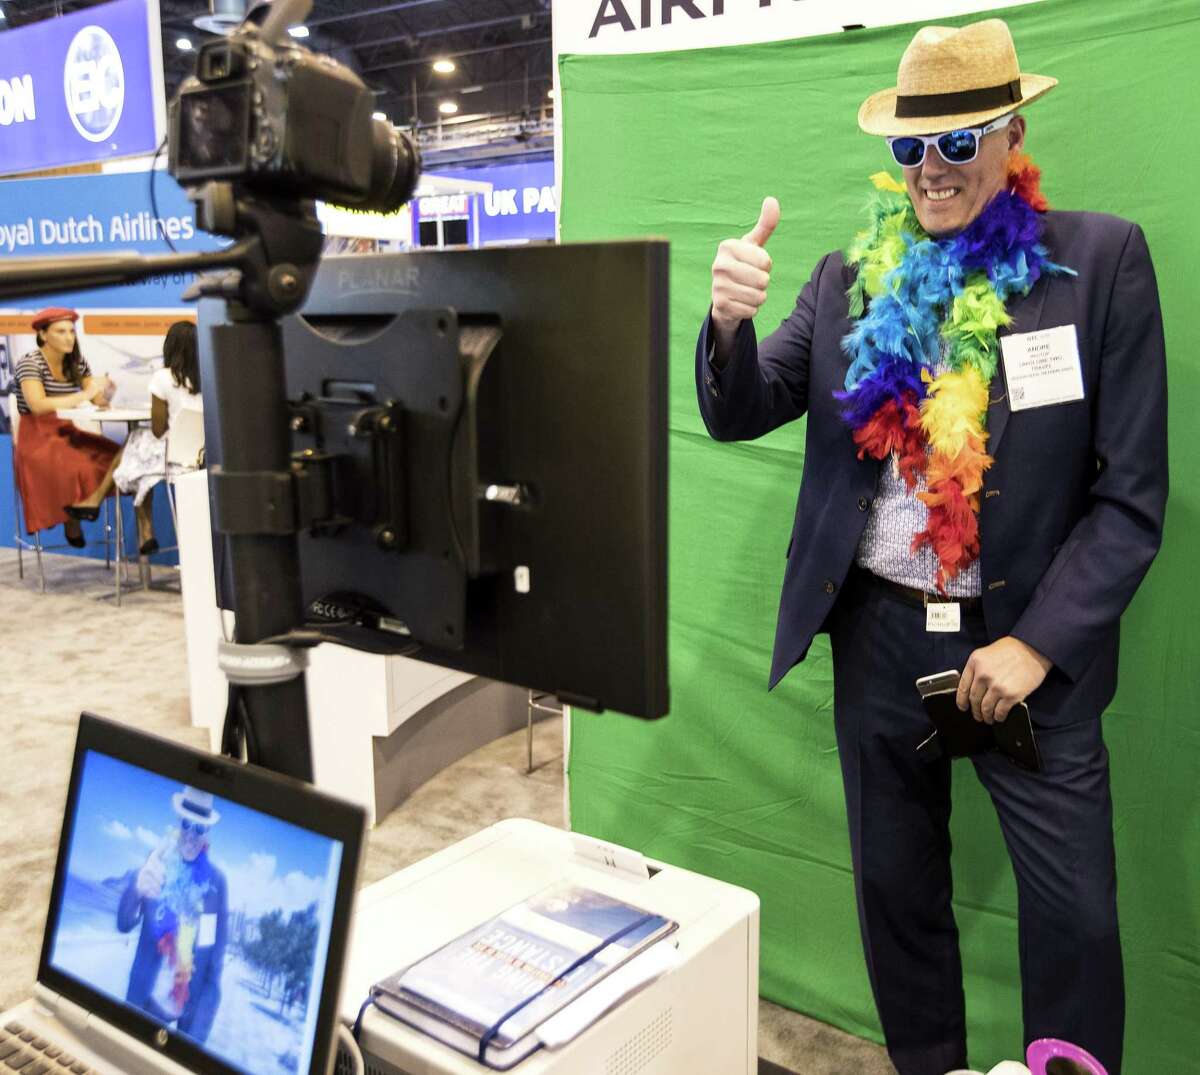 Andre Regtop, of The Netherlands, poses for a funny green screen photo during the 50th Offshore Technology Conference on Monday, April 30, 2018, in Houston. ( Brett Coomer / Houston Chronicle )